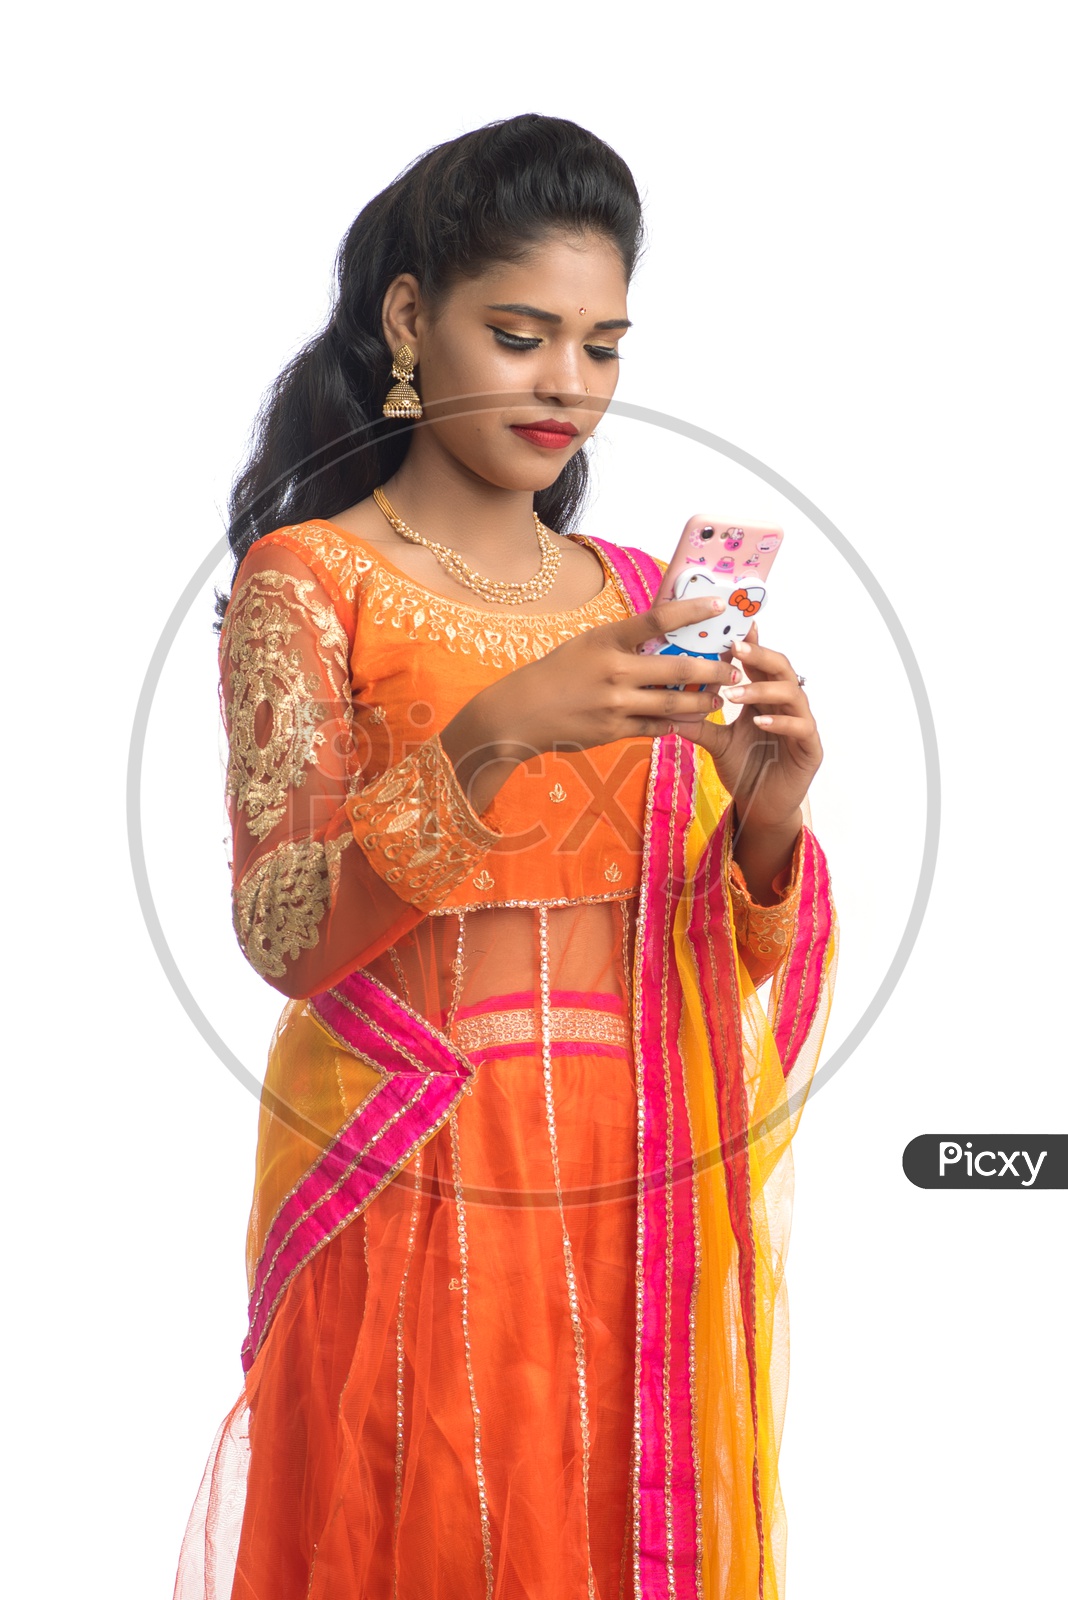 Young Indian Traditional Girl Using Smart phone over White background